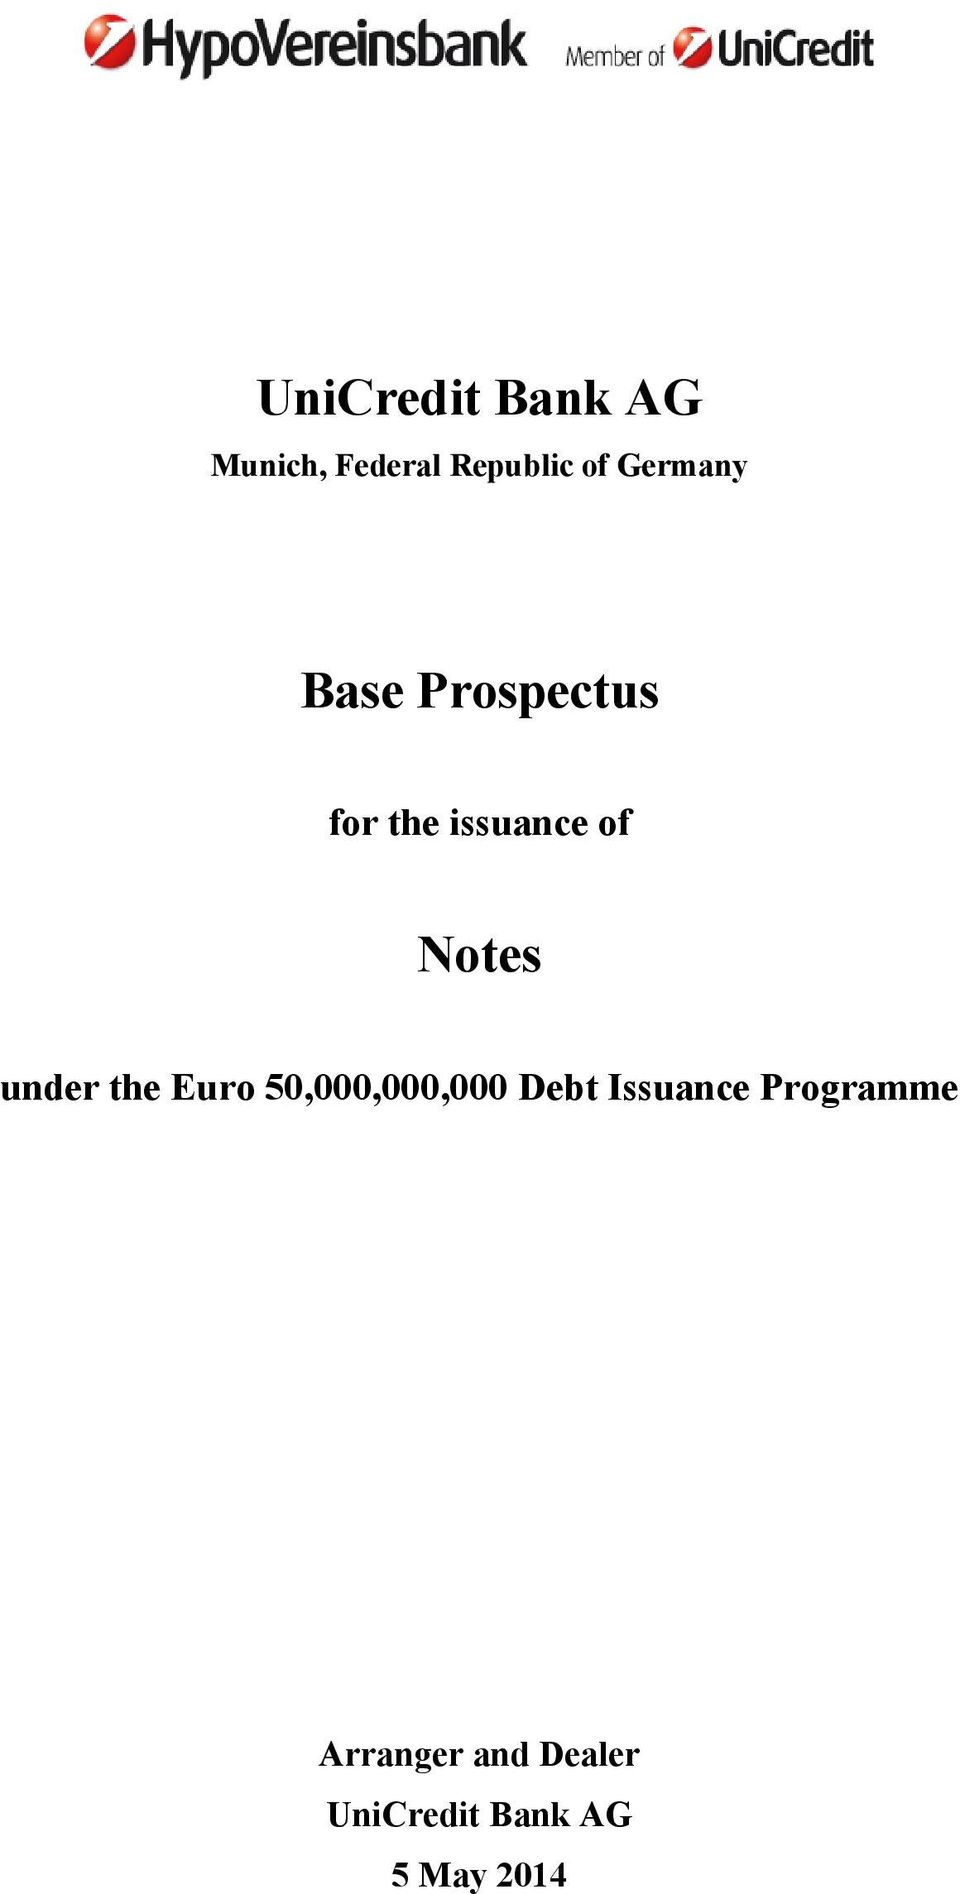 under the Euro 50,000,000,000 Debt Issuance